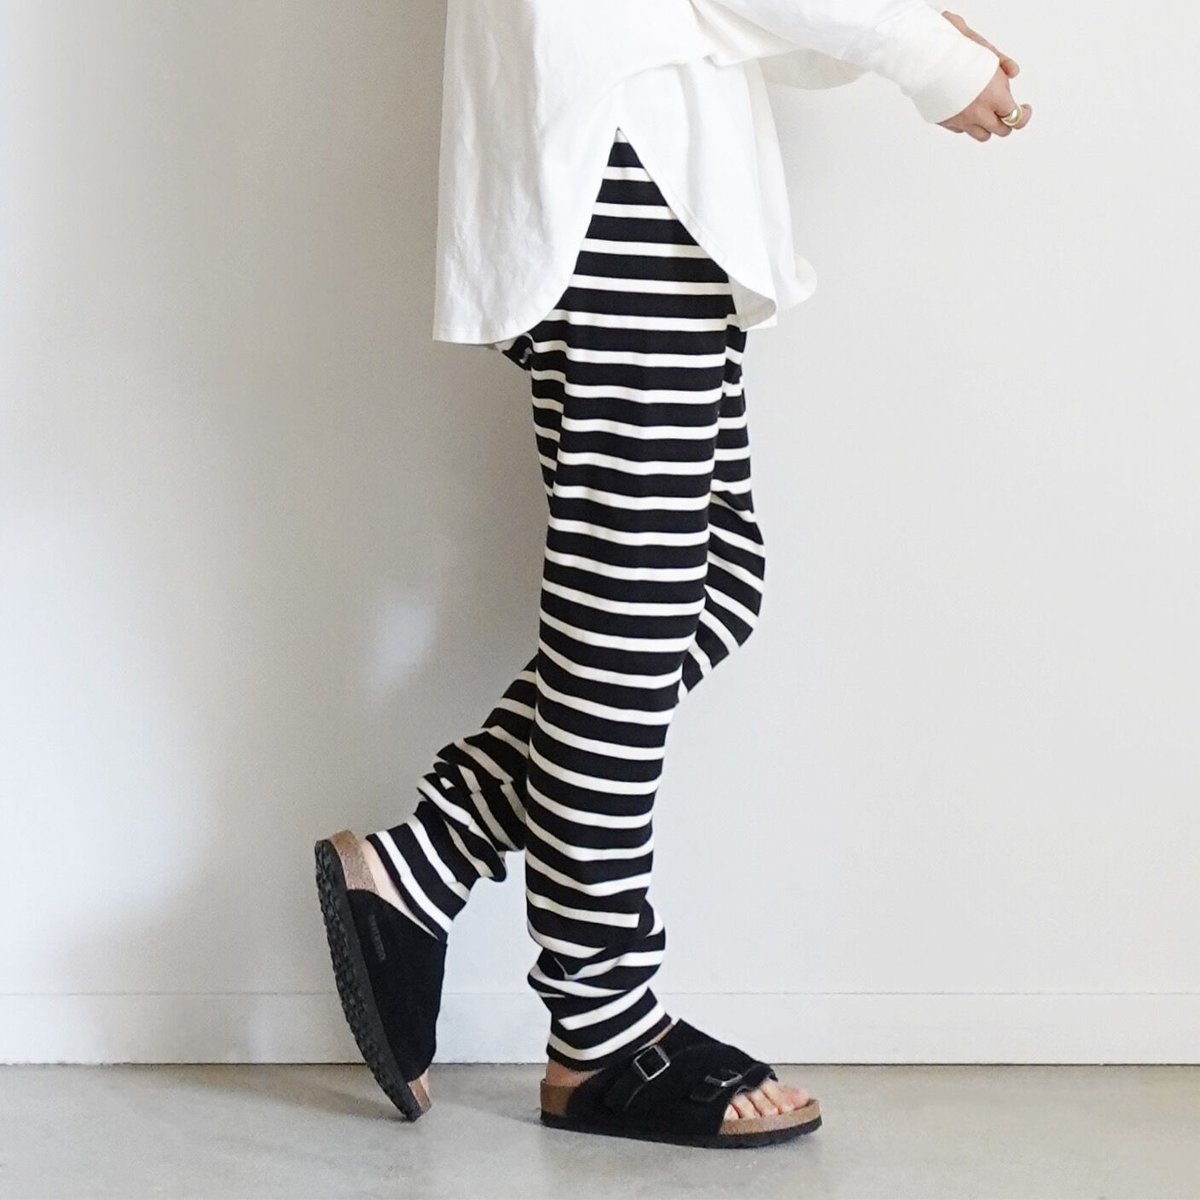 【 ONLINE LIMITED 】ichi 230158 Relax Border Leggings / A 